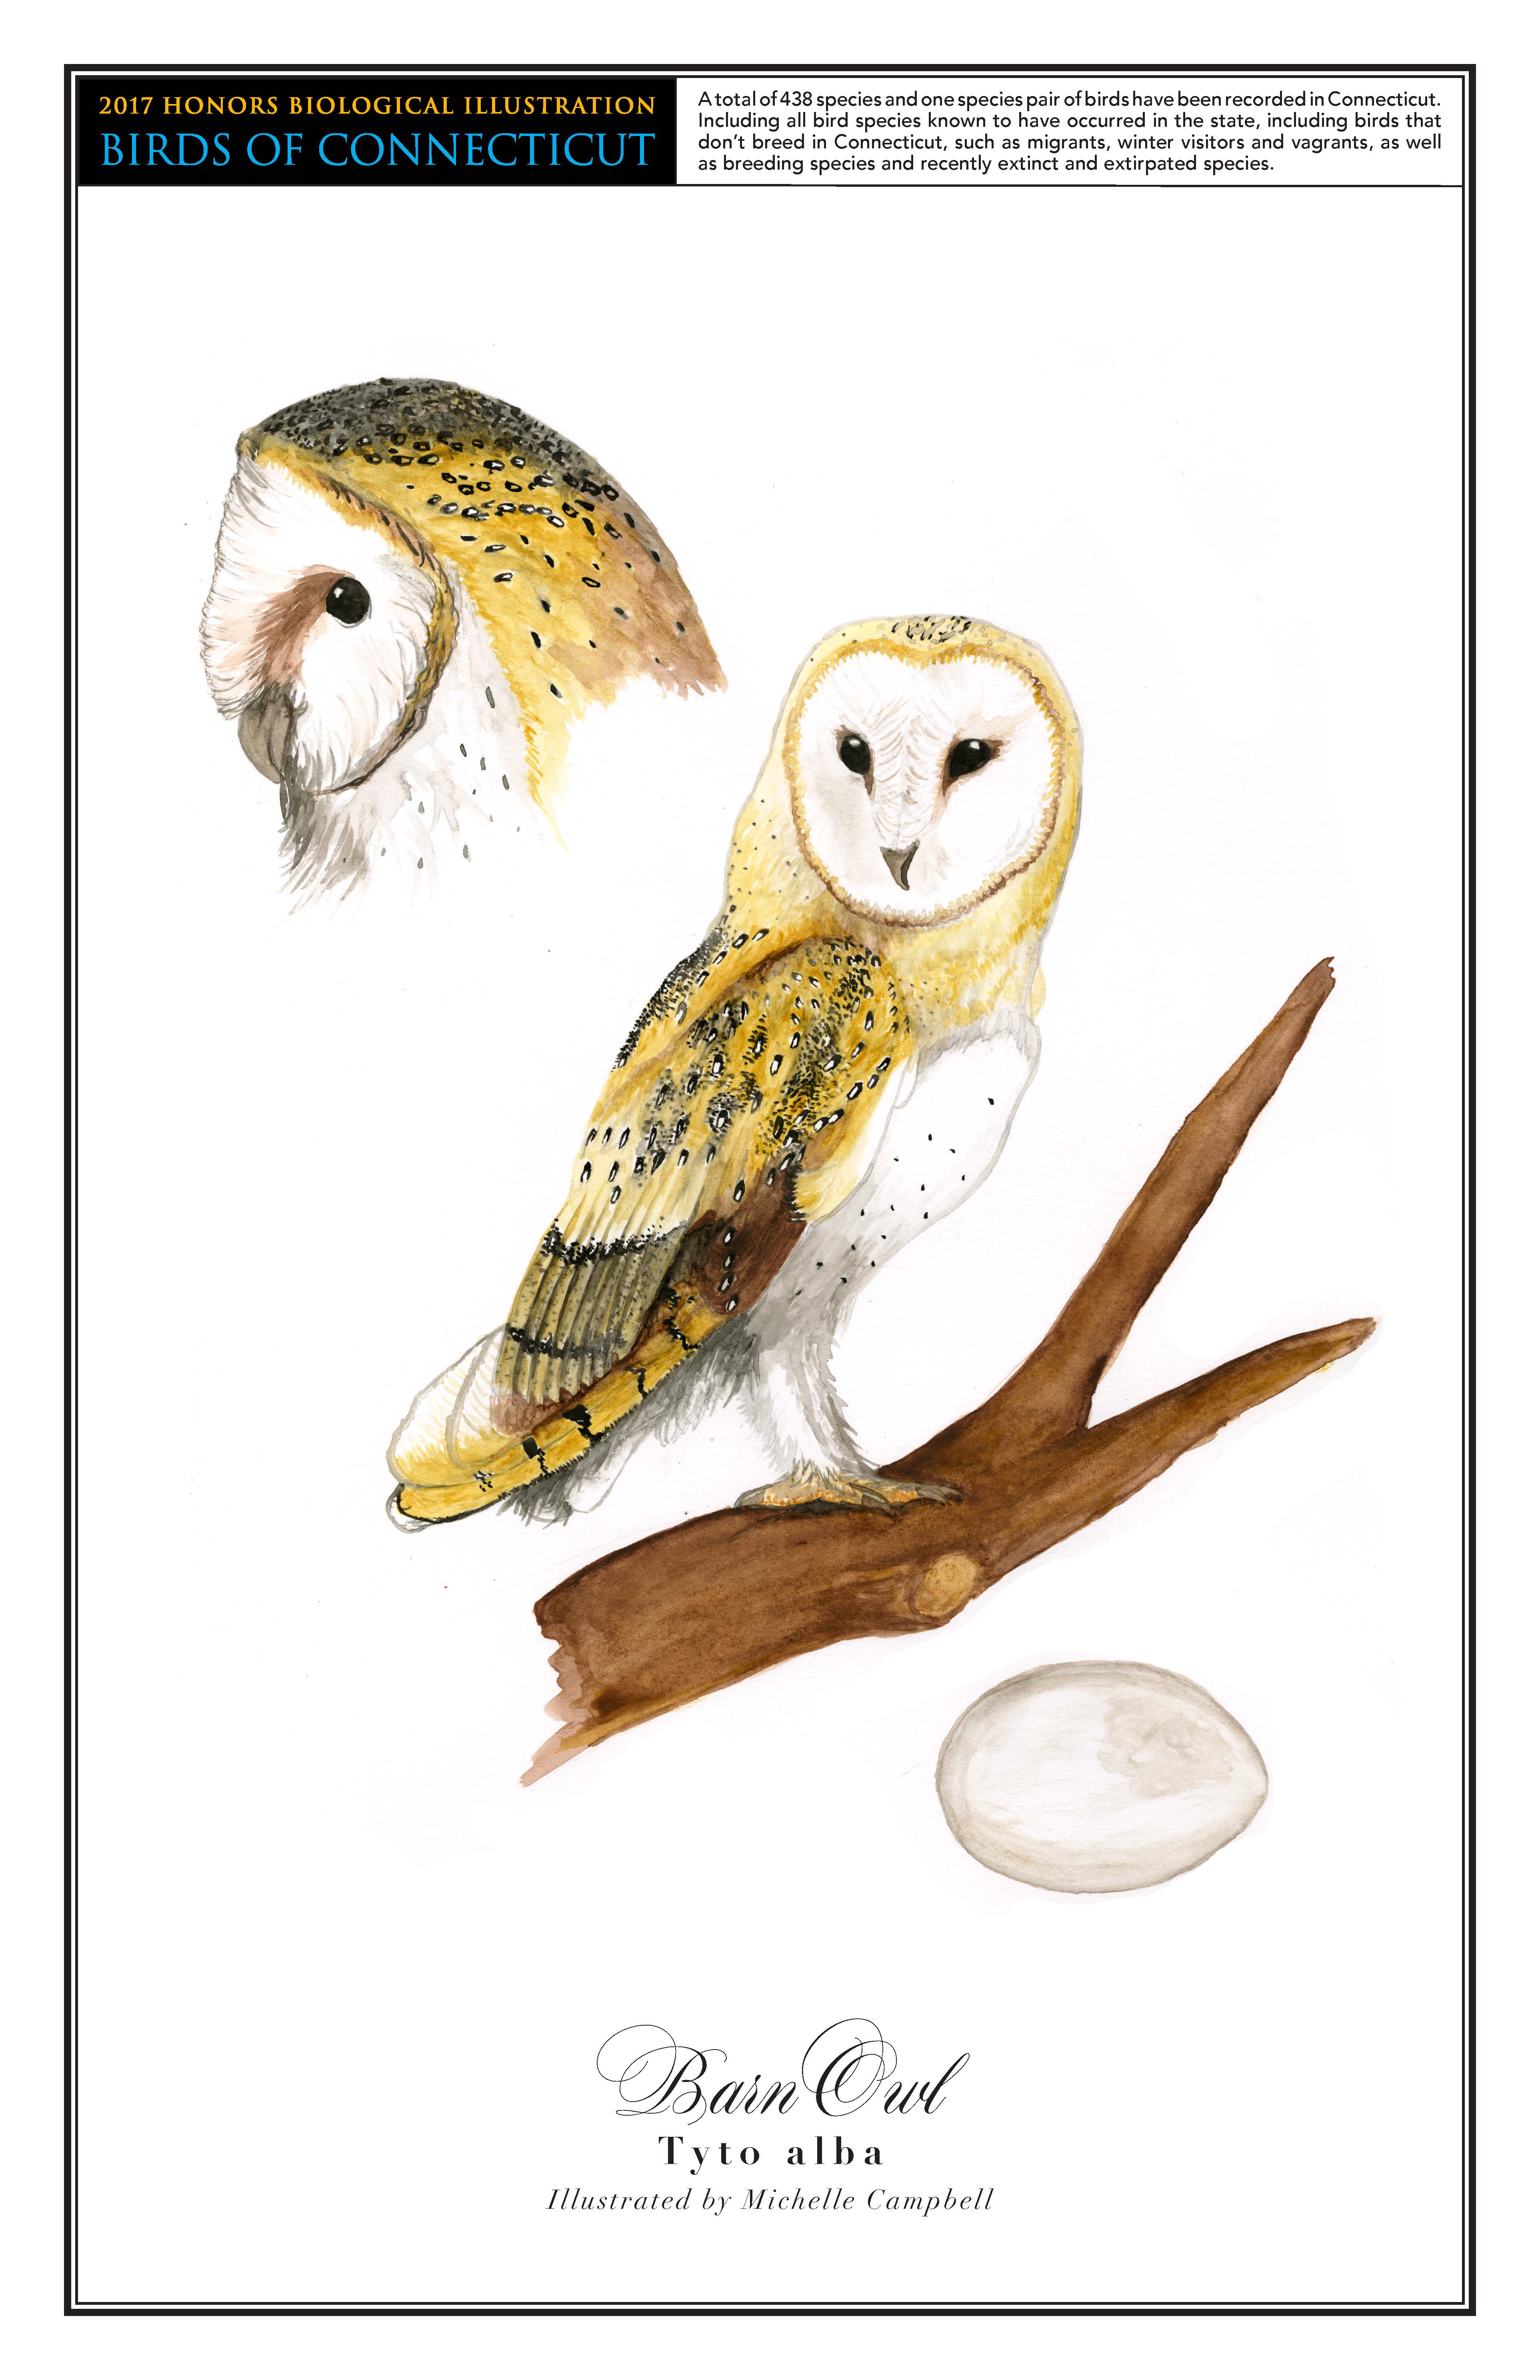 The barn owl has a white face and mostly tan body. A drawing of it perched on a thick branch is in the center of the page. Below that is a drawing of its white egg. In the top left corner is a close up drawing of its head turned to the right.